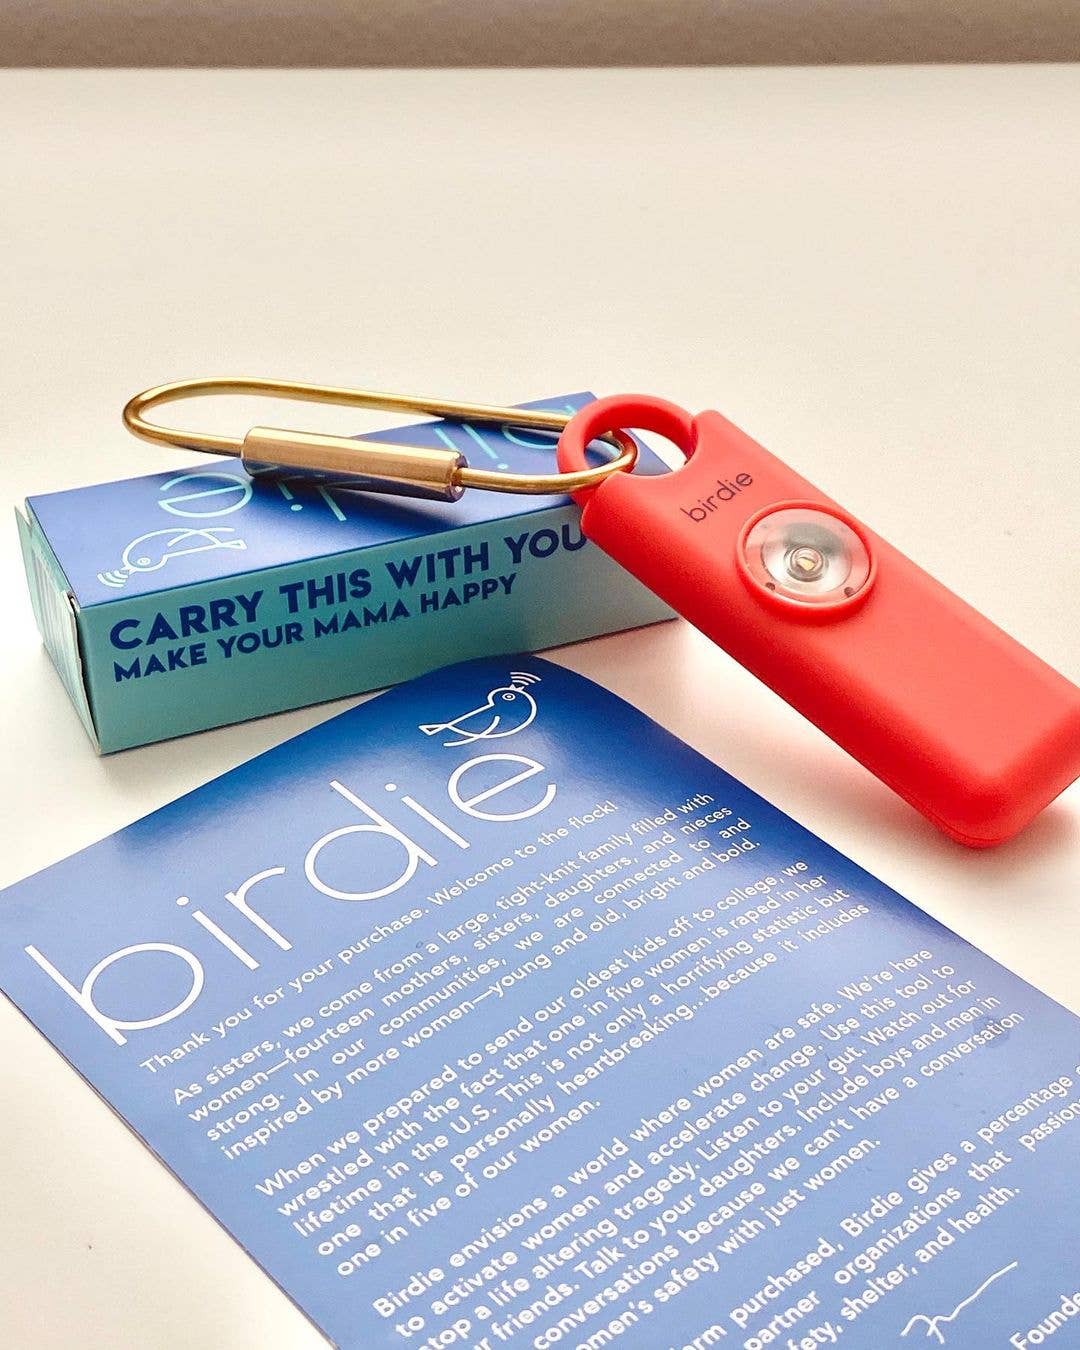 She's Birdie Personal Safety Alarm in Assorted Colors--Lemons and Limes Boutique